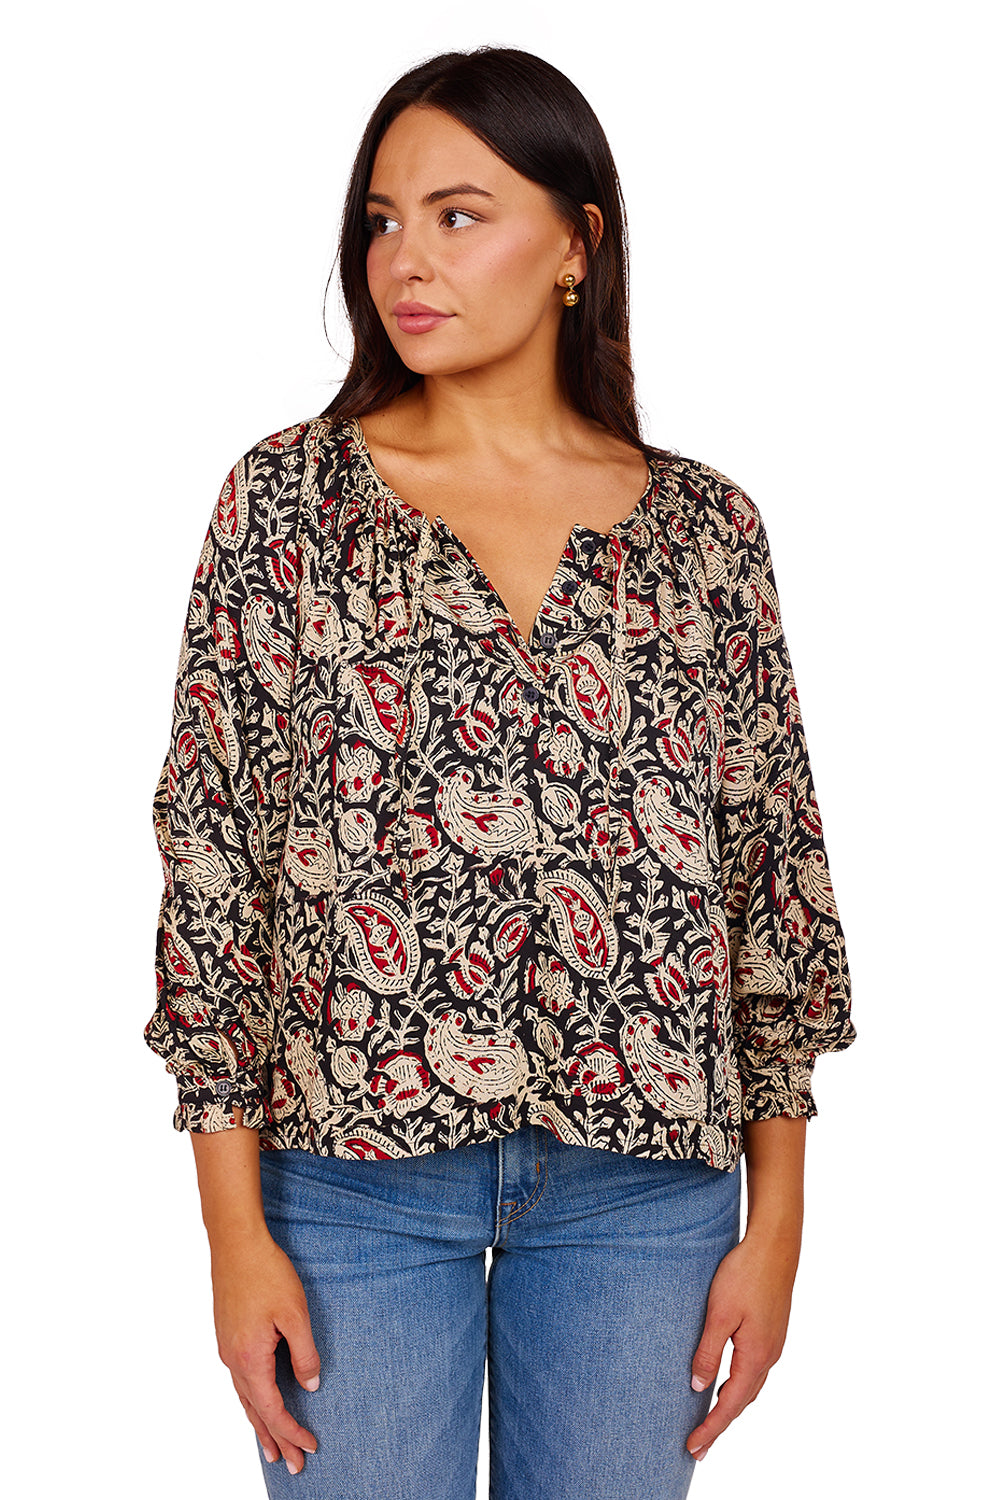 Lucy 2 Blouse - Paisley Black + Clay Satin